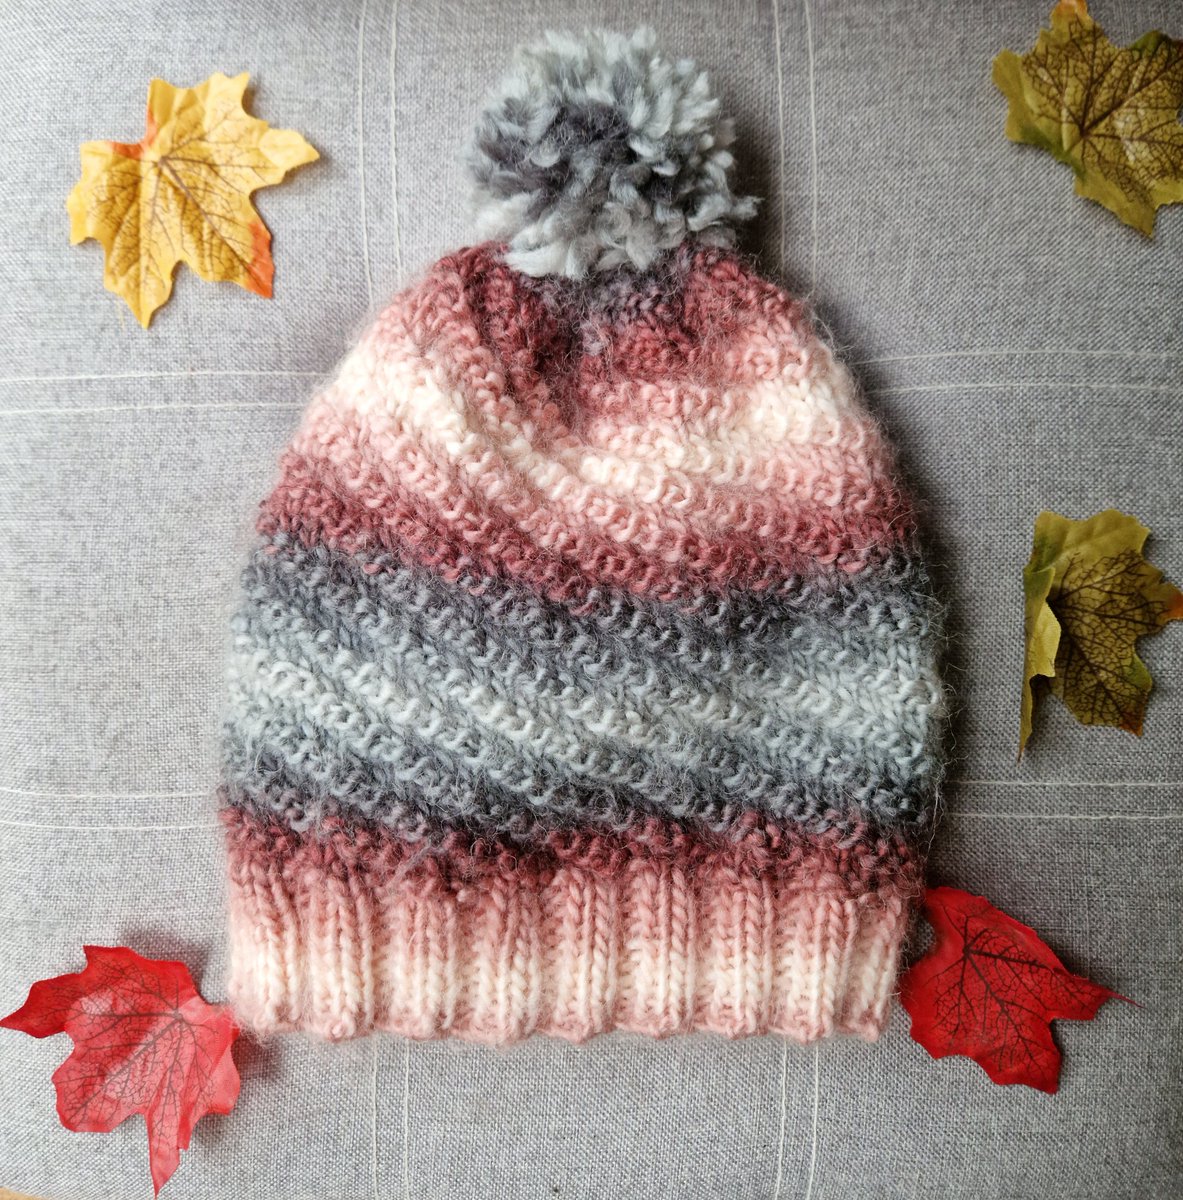 Forget raspberry berets, raspberry sorbet pom pom hats are where it's at. This super soft number promises to keep you warm and stylish during the winter months etsy.com/uk/listing/158… #hats #knitwear #WinterIsComing #shopindie #ukgiftam #craftbizparty #etsyhandmade